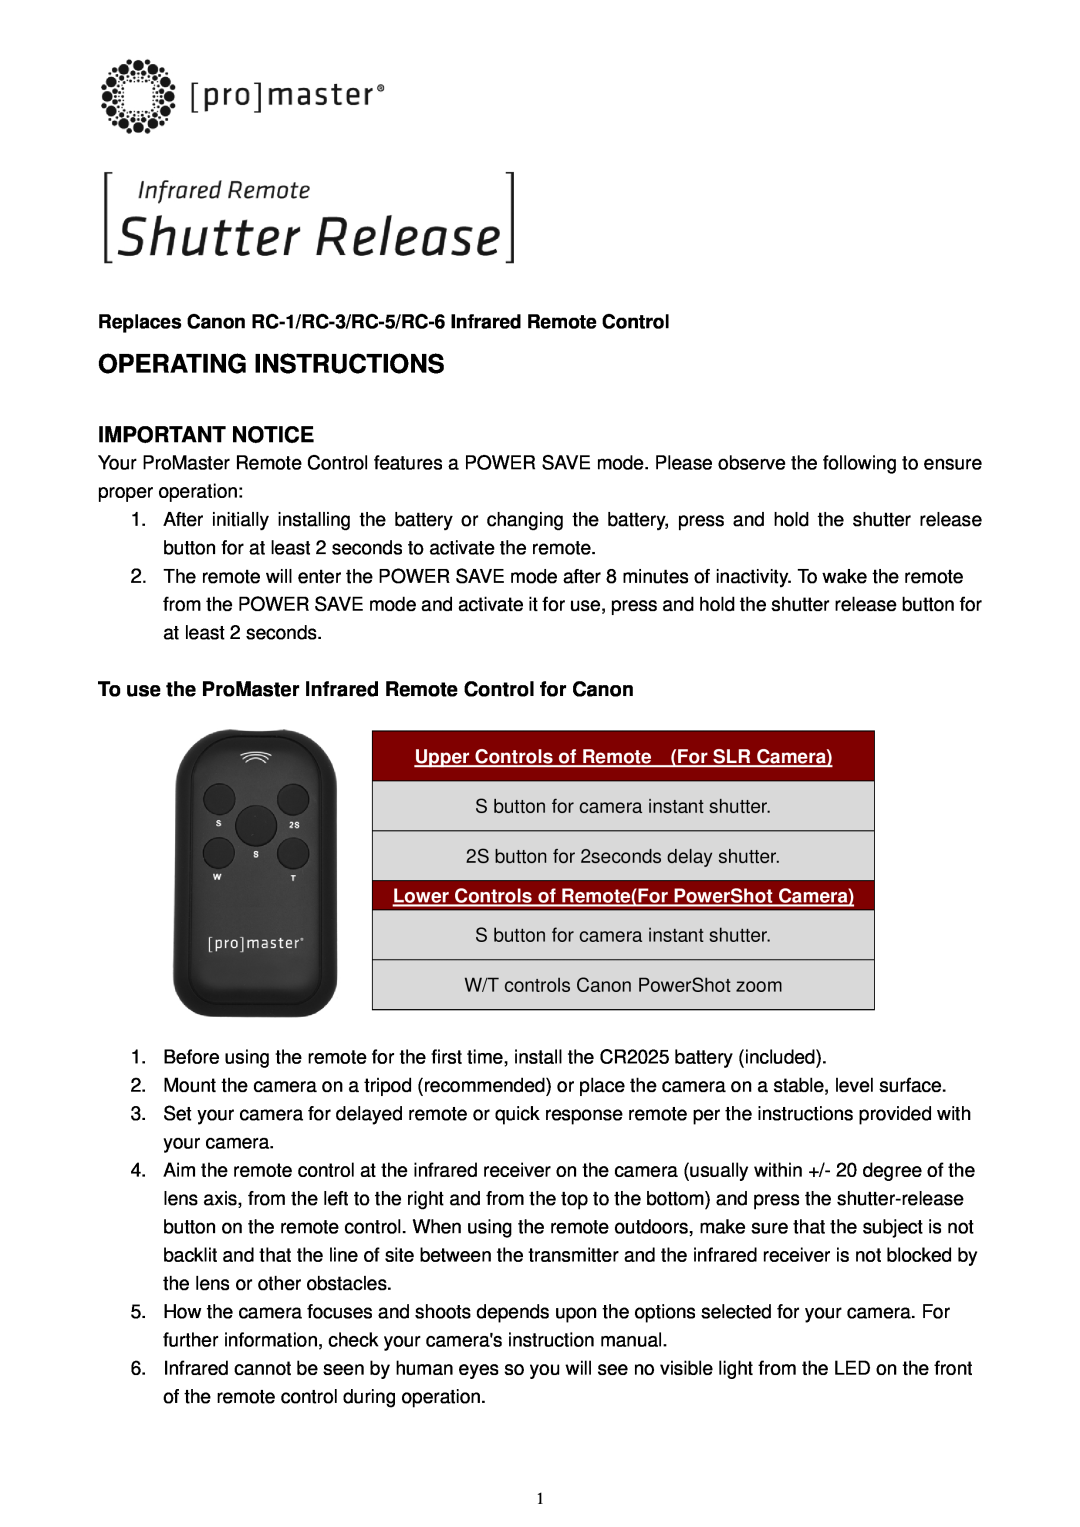 Canon RC-3, RC-6, 5, RC-1 instruction manual Important Notice, To use the ProMaster Infrared Remote Control for Canon 